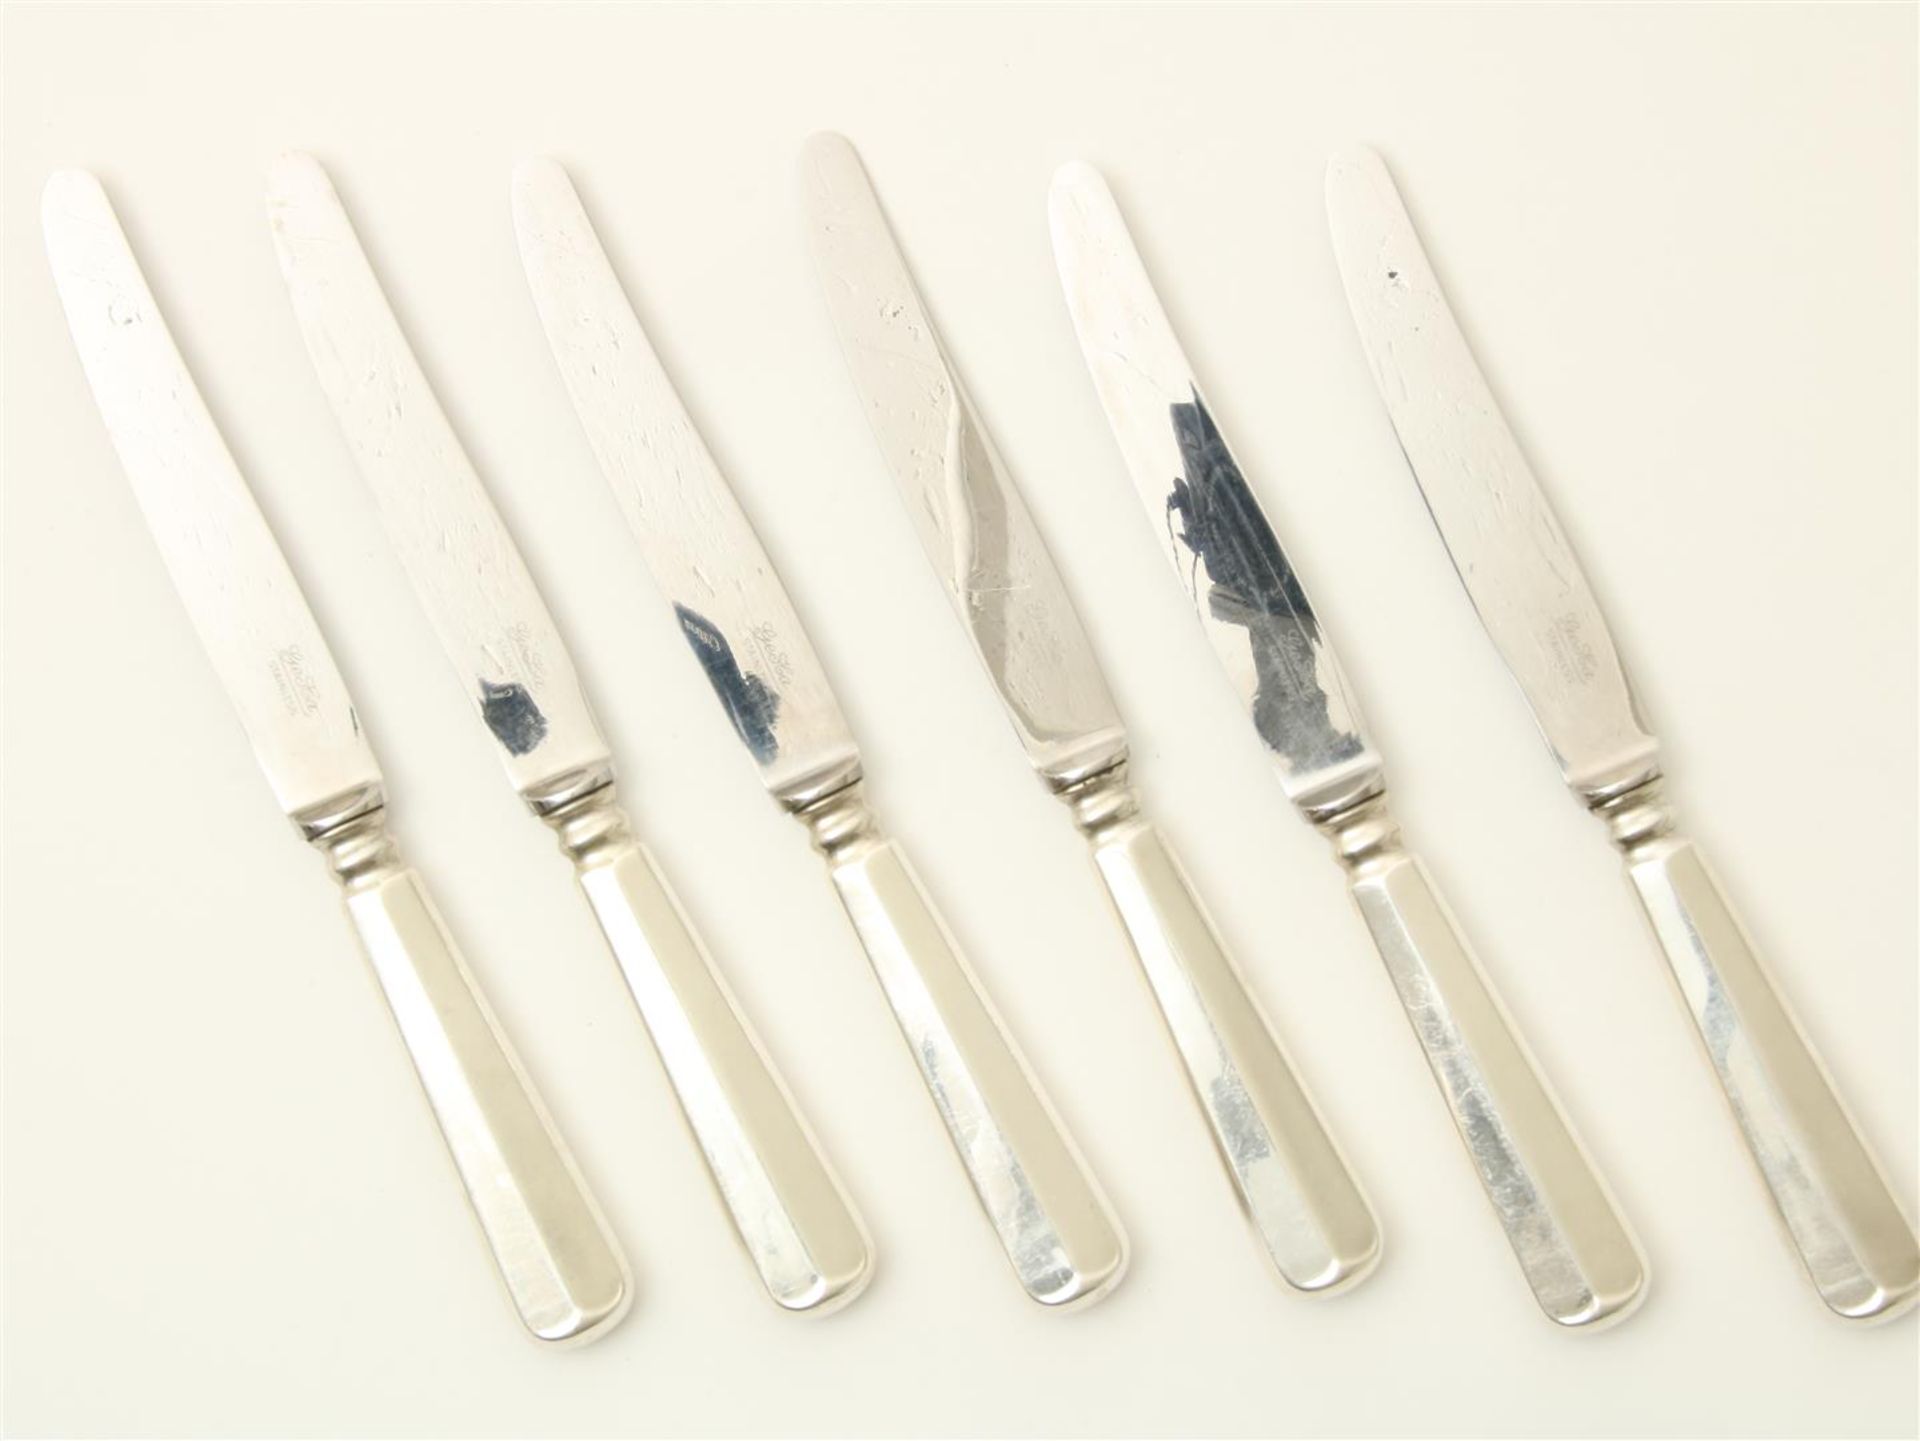 Series of 6 knives with silver handles, model: Haags Lofje, grade 835/000, maker's mark: "GH3":